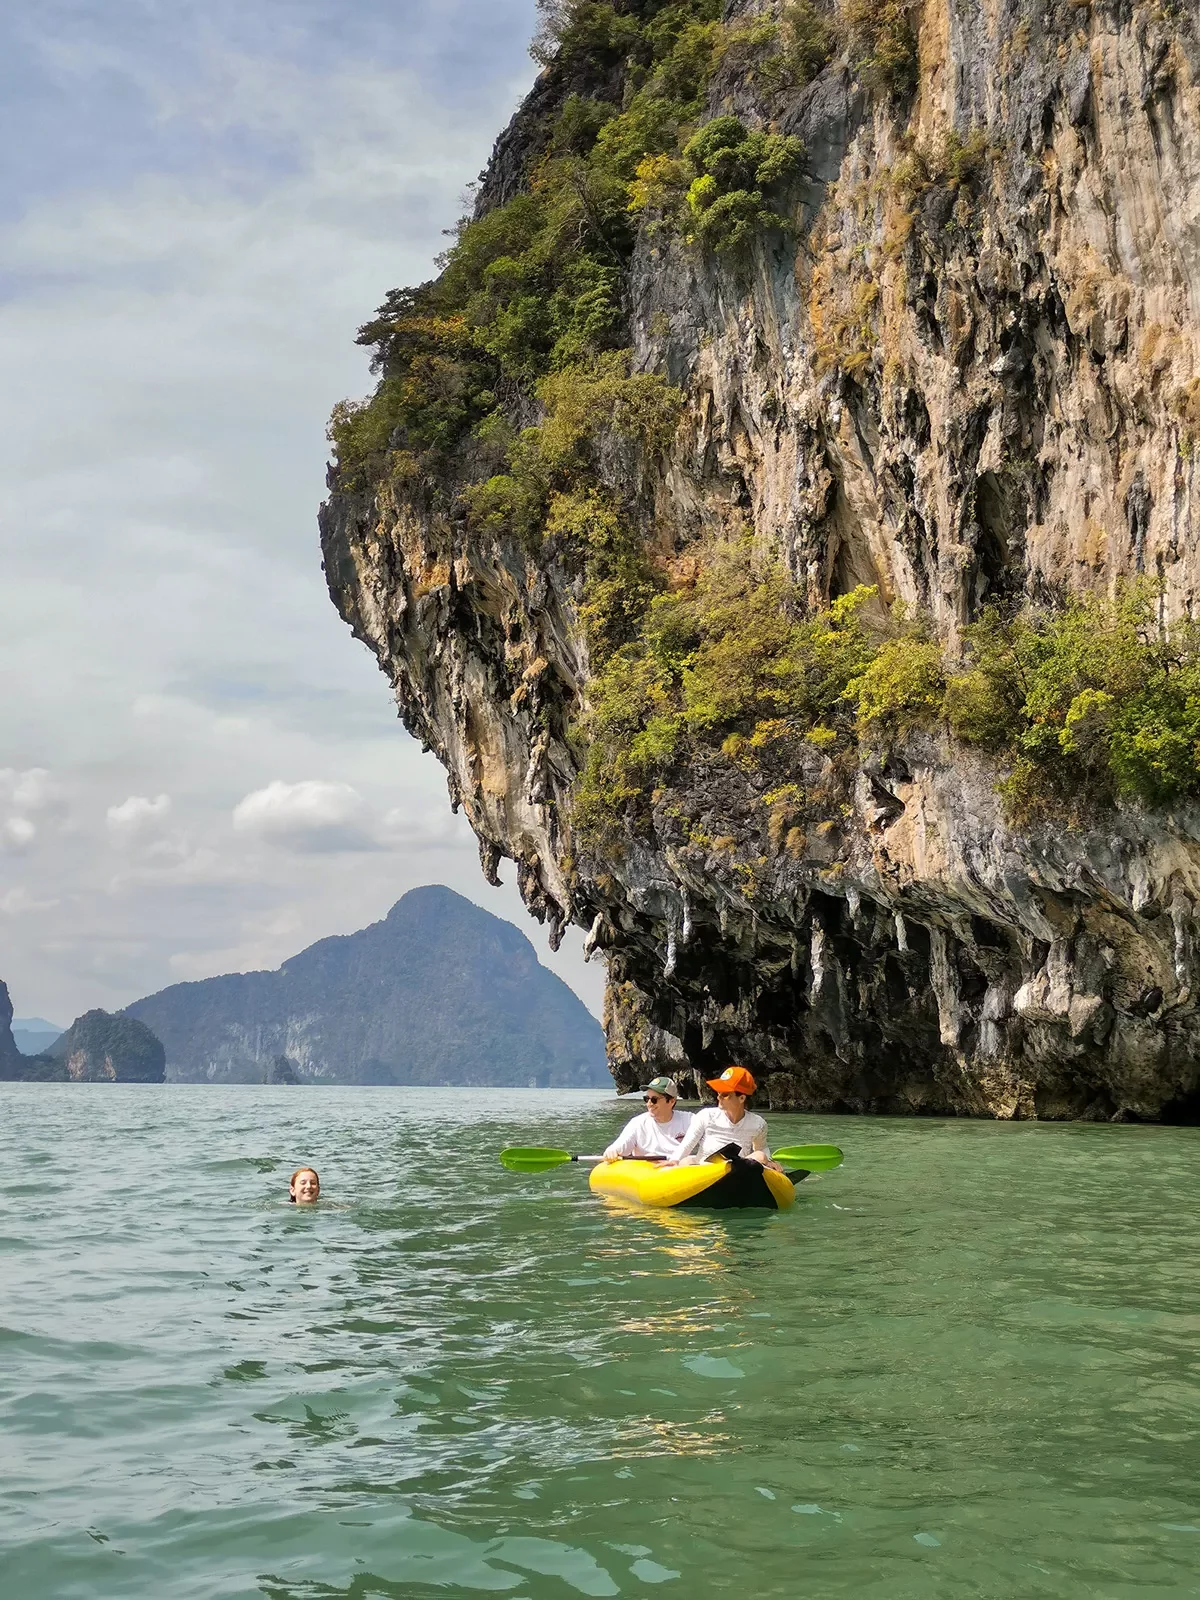 Kayaking in Thailand among large rock formations